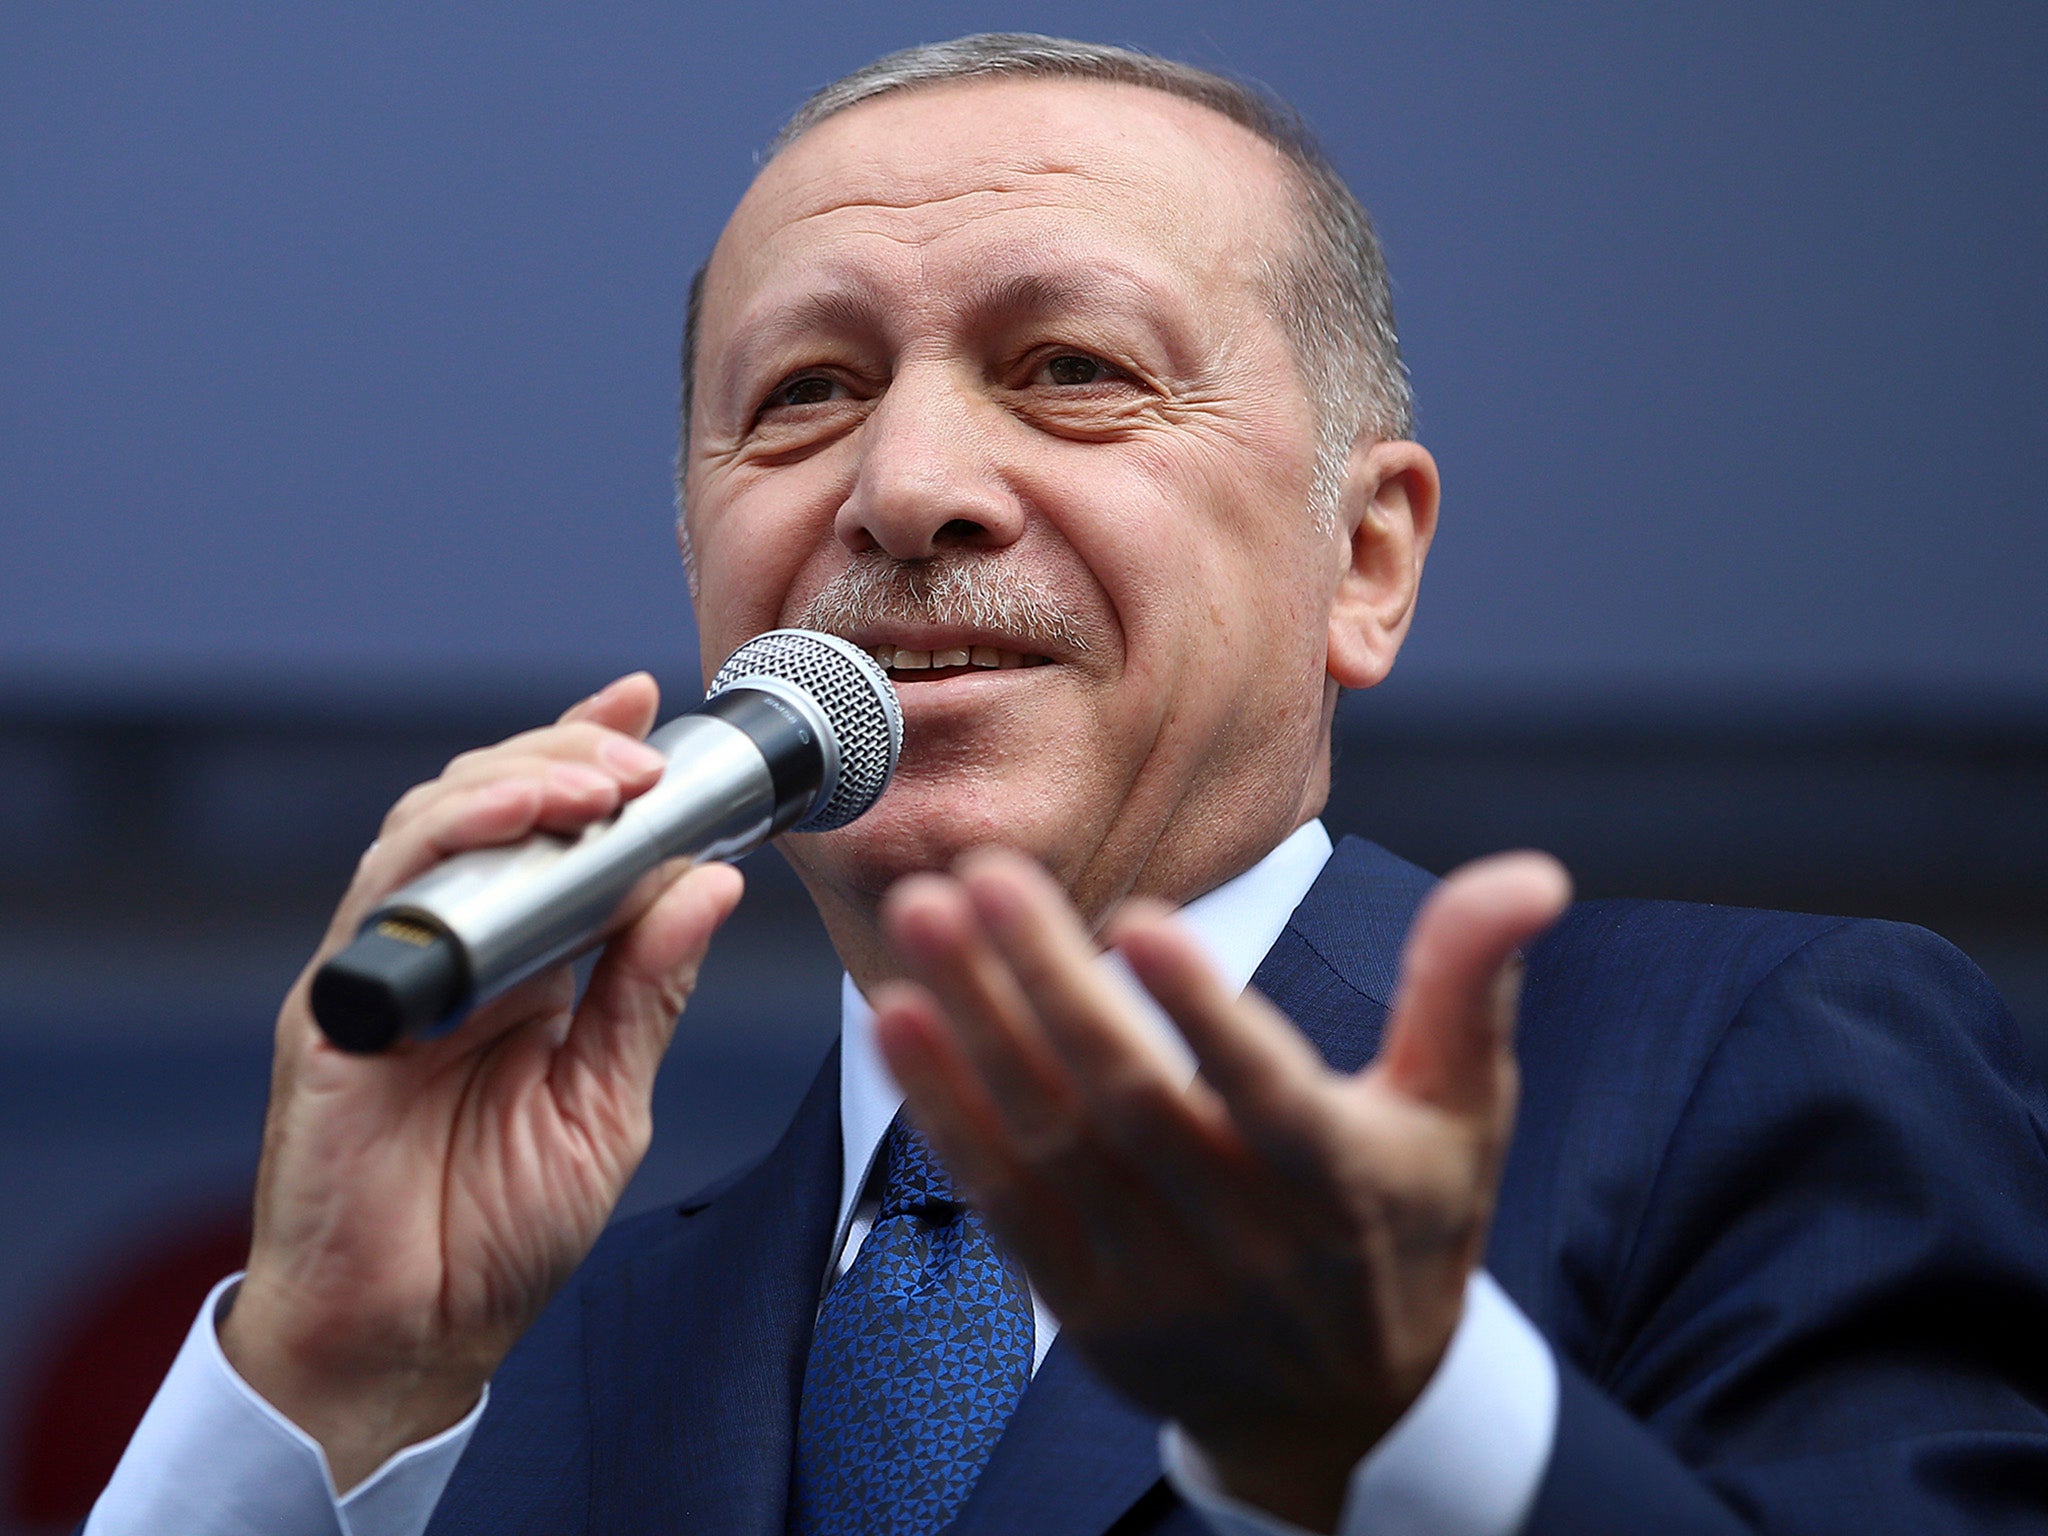 ‘That business is finished. That does not exist anymore,’ Erdogan said on Friday